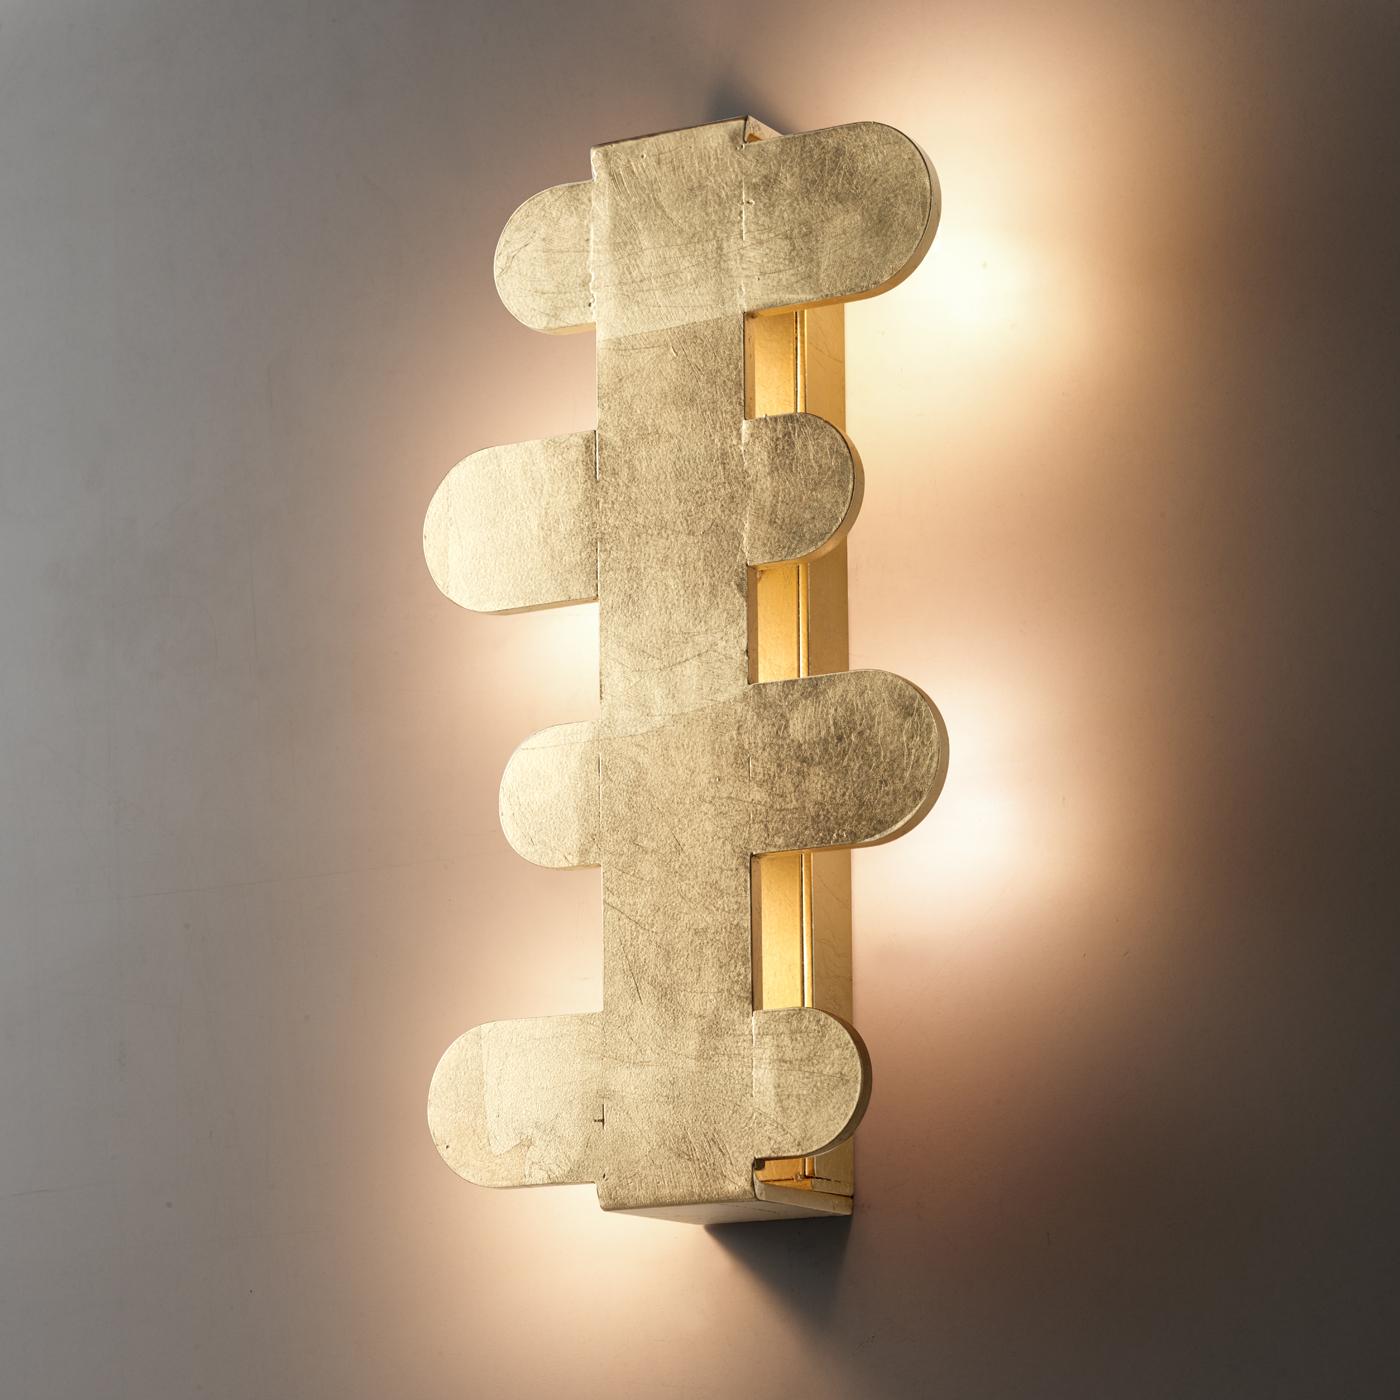 Merging the preciousness of gold leaf and markedly contemporary design, this one-off wall lamp would be a superb addition to luxe contemporary interiors. The metal frame enriched by a gold-leaf coating comprises four horizontal, elliptical elements